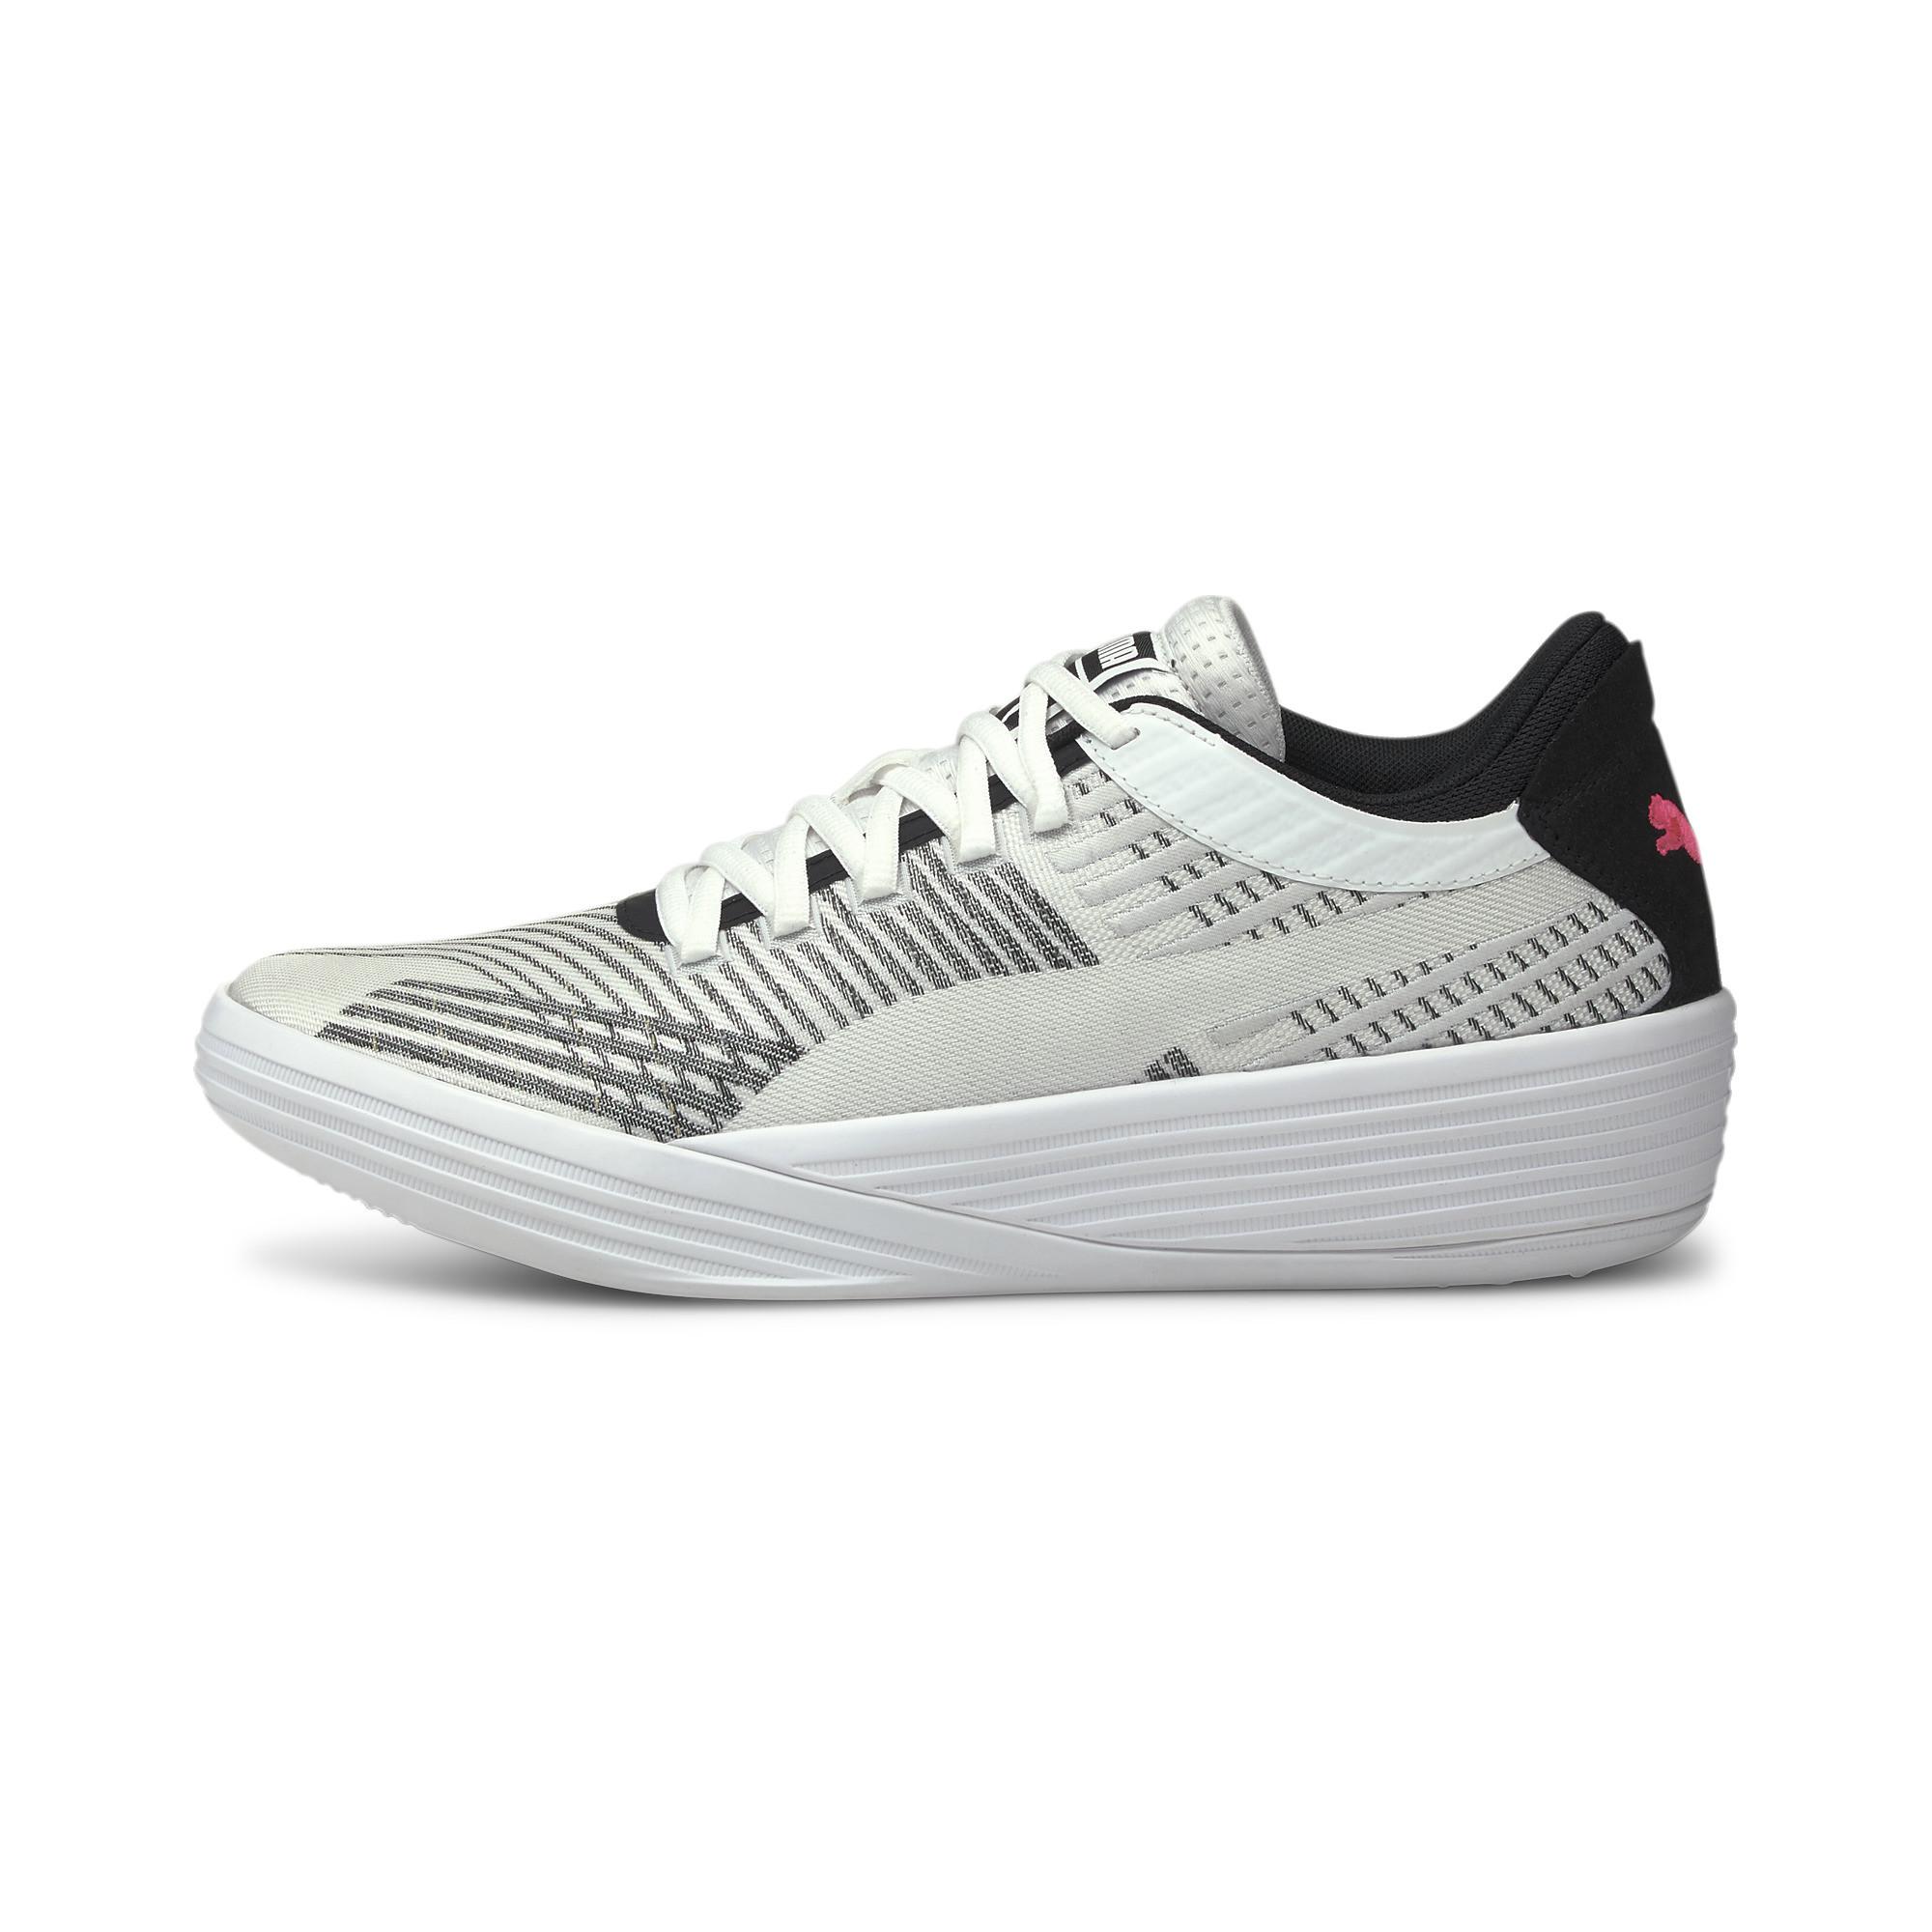 PUMA Clyde All-pro Basketball Shoes in White- Black (White) for Men - Lyst